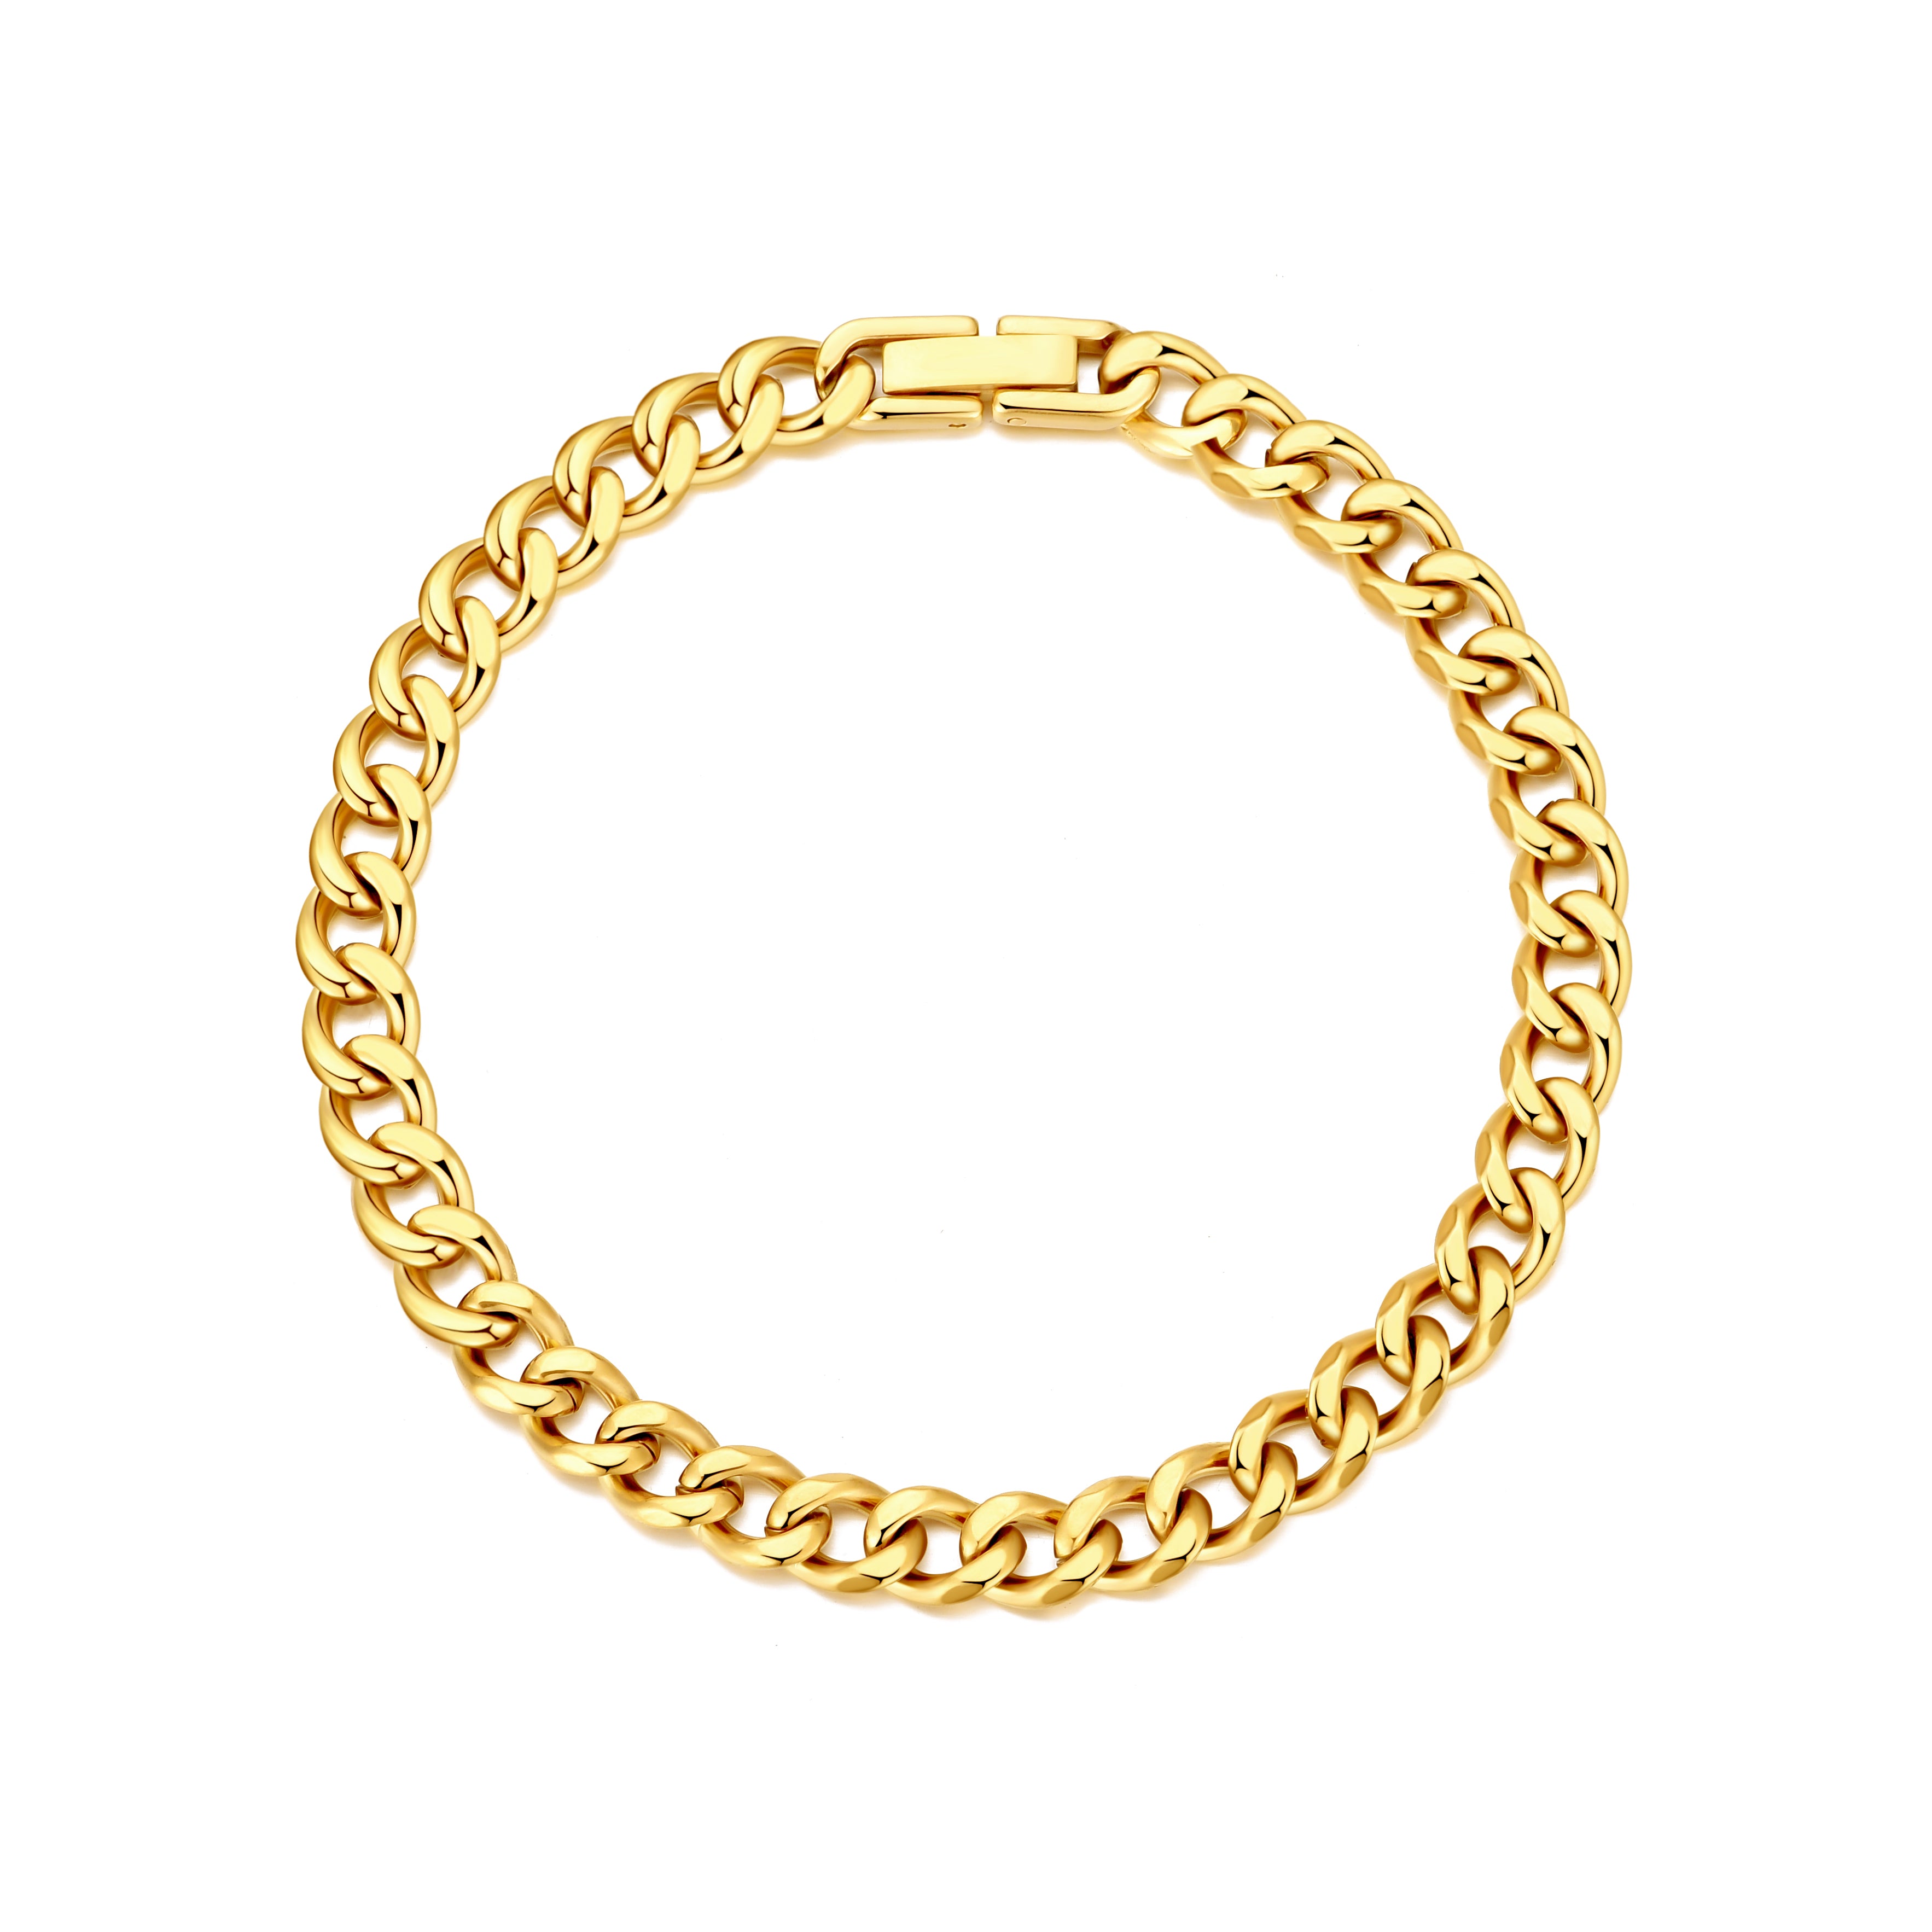 Men's 6mm Gold Plated Stainless Steel 7.5-8.5 Inch Curb Chain Bracelet by Philip Jones Jewellery